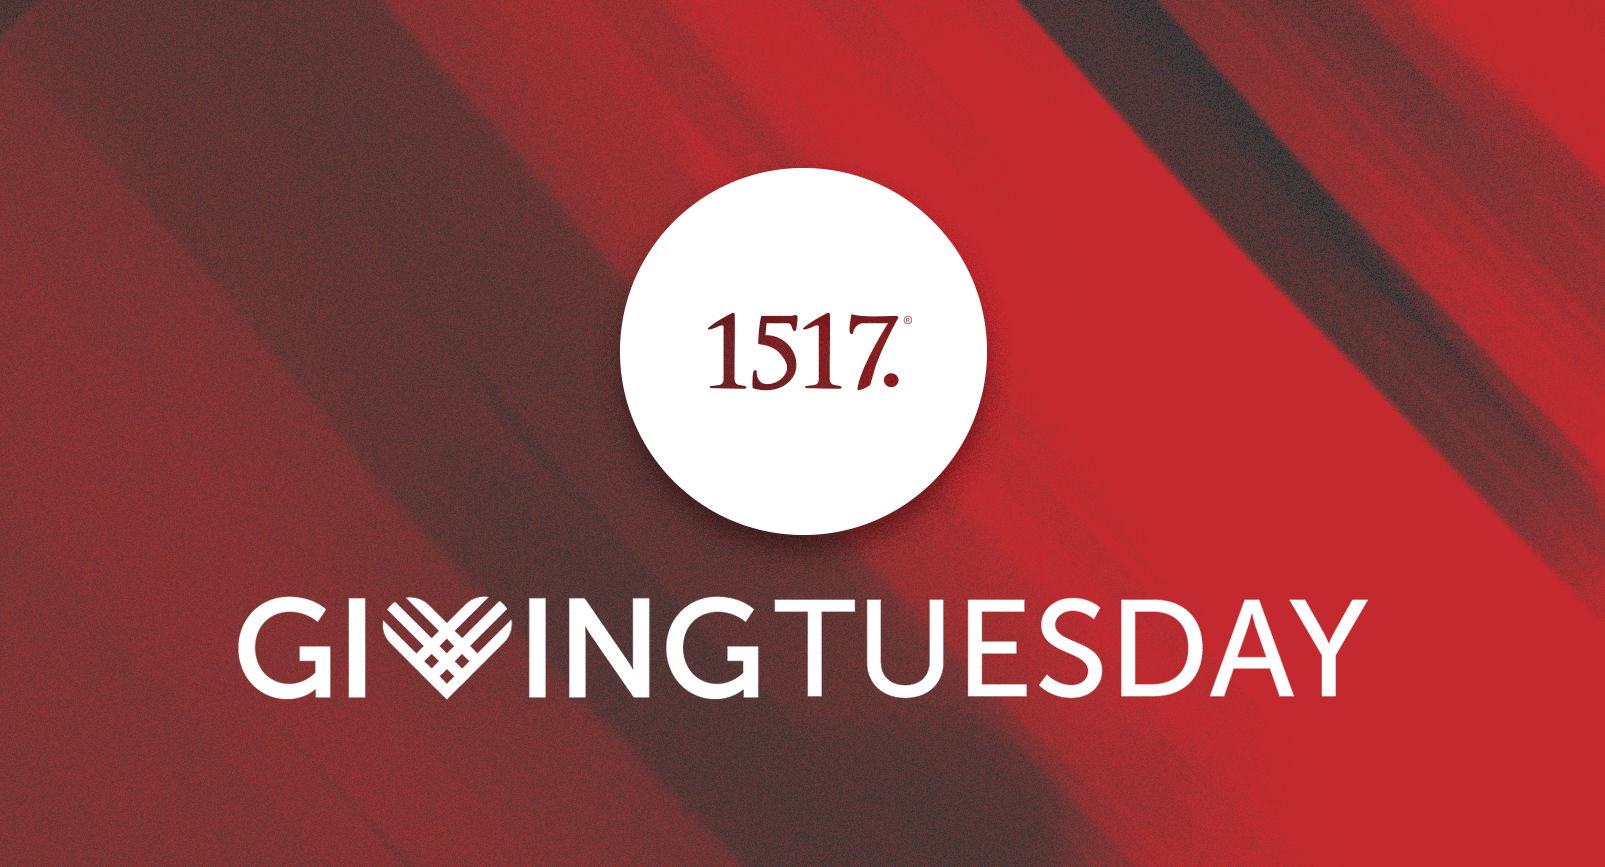 A Message for Giving Tuesday